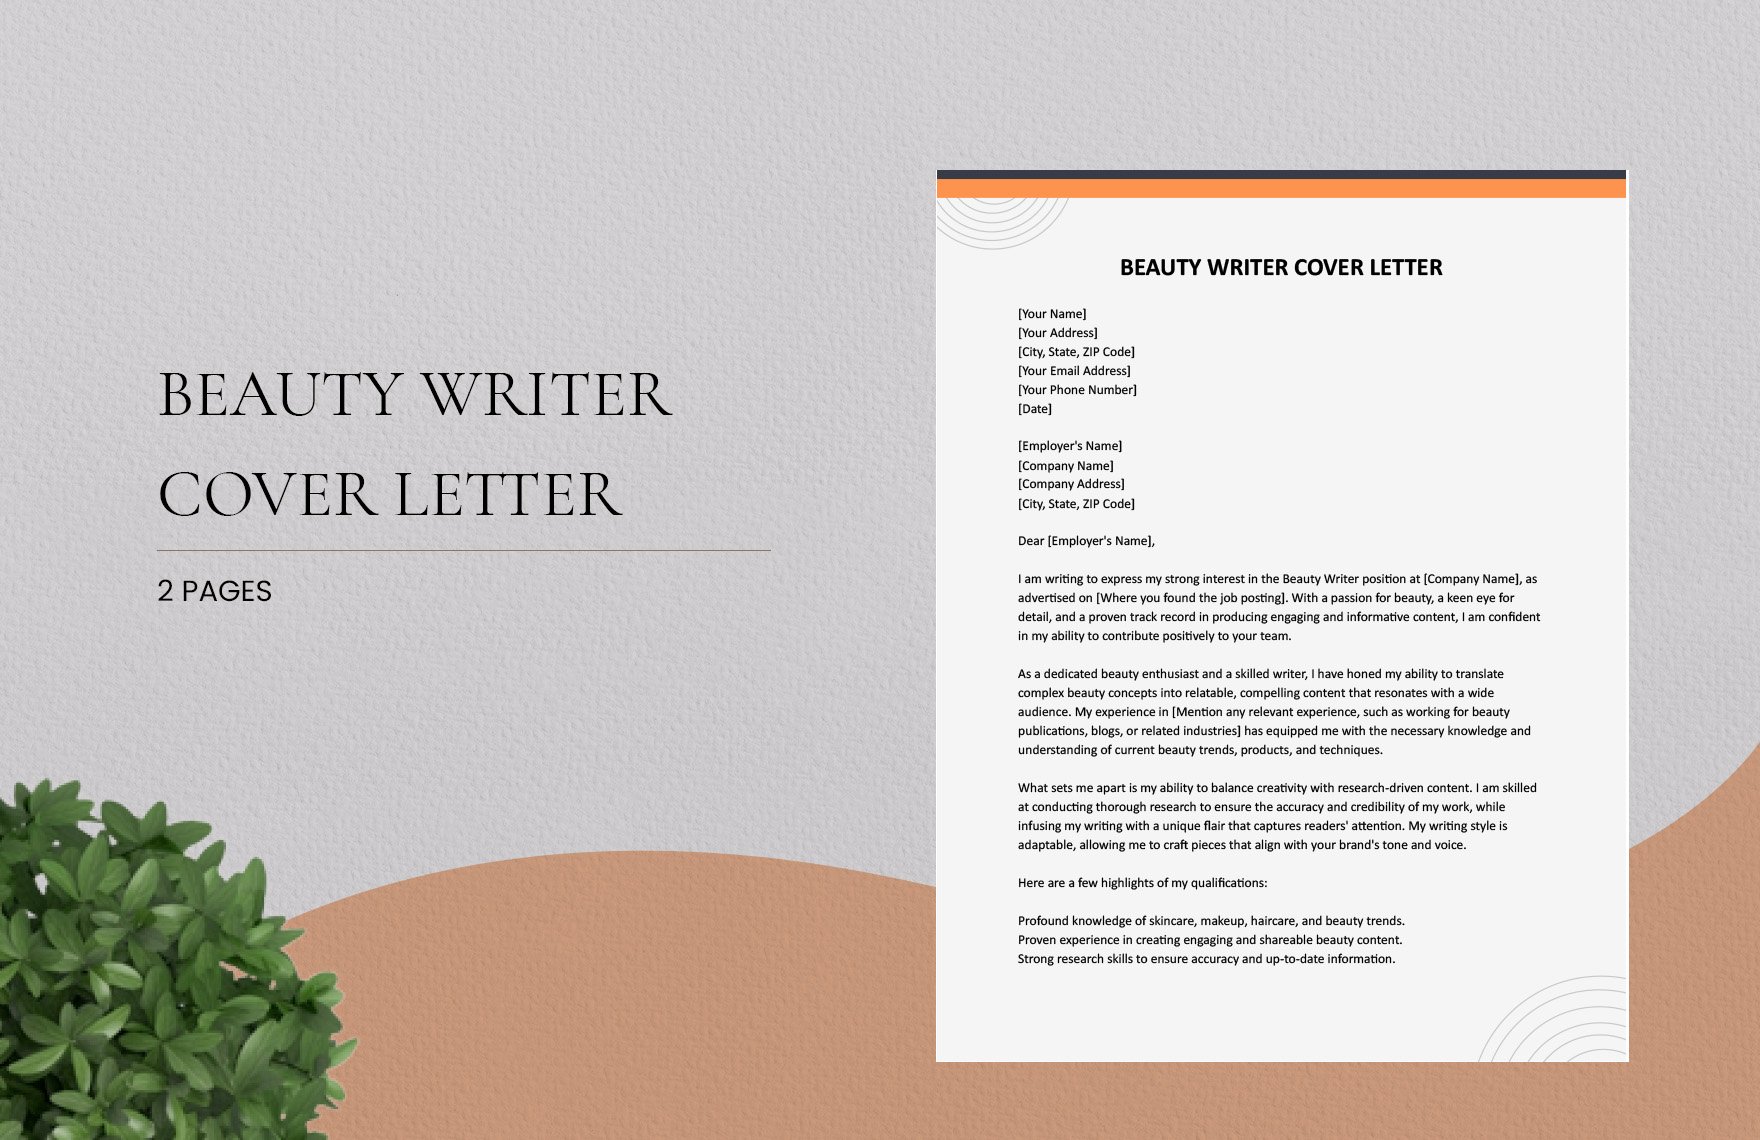 Beauty Writer Cover Letter in Word, Google Docs